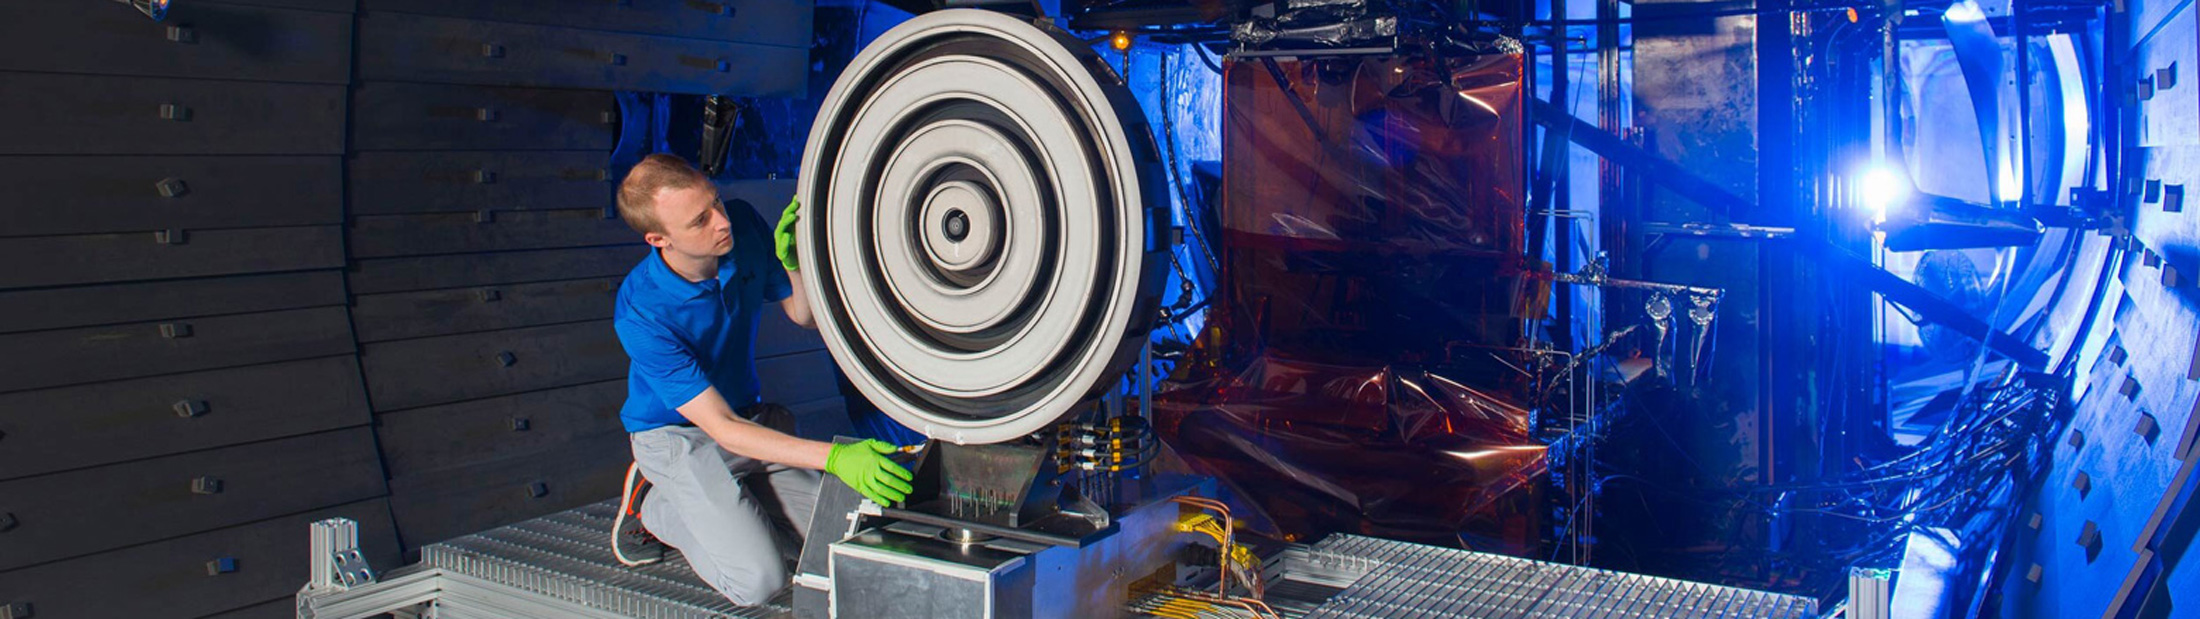 Scott Hall, former doctoral student in aerospace engineering at the University of Michigan, adjusts the record-setting X3 thruster at NASA Glenn Research Center in 2017. Credit: NASA